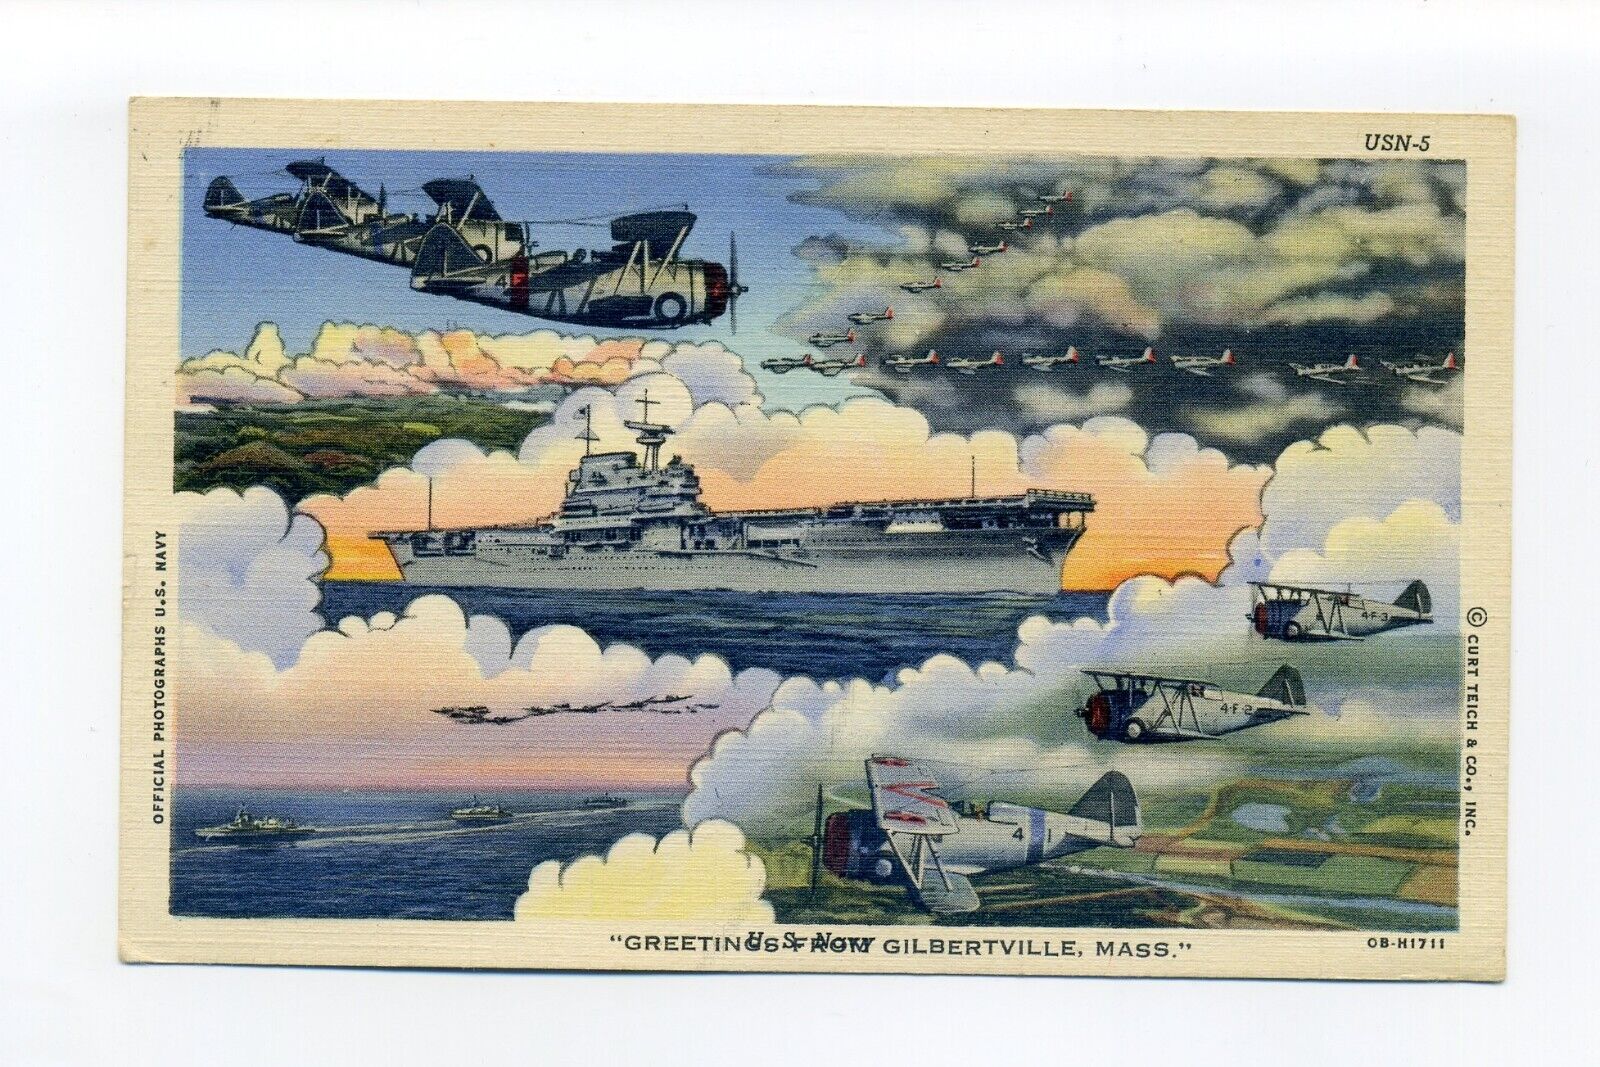 Greetings from Gilbertville Hardwick, MA 1946 postcard, WWII military theme